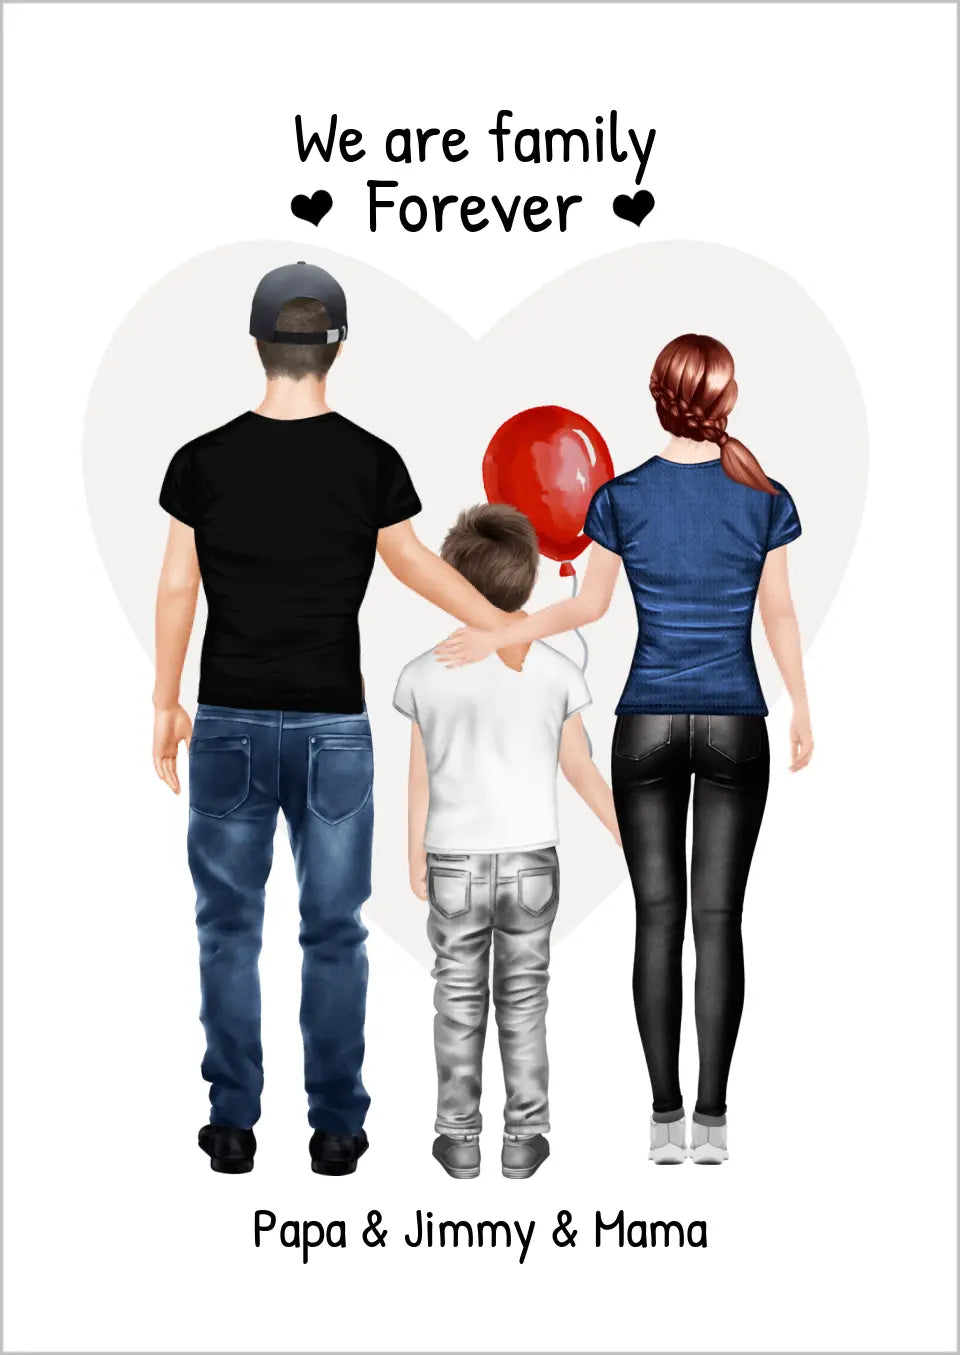 Personalisiertes Poster Geschenk Familie - Familienbild mit 1 Kind - Personalisiertes Familienportrait - We are family